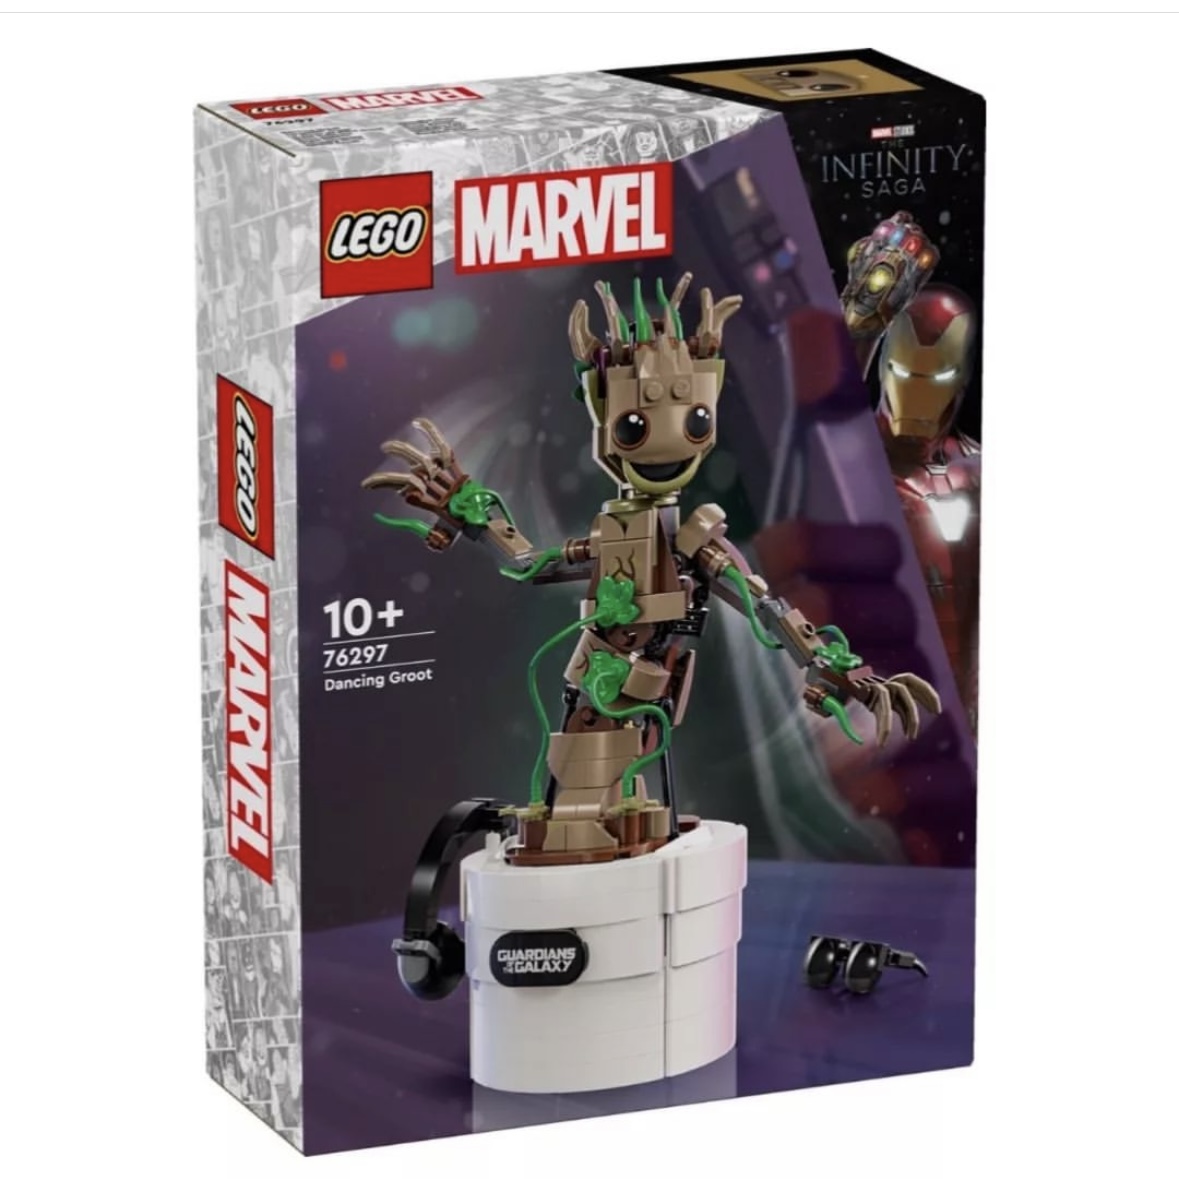 First look at the new Dancing Groot Lego Set! From I Am Groot ~ coming in August! #FPN #FunkoPOPNews #Lego #Groot #IAmGroot